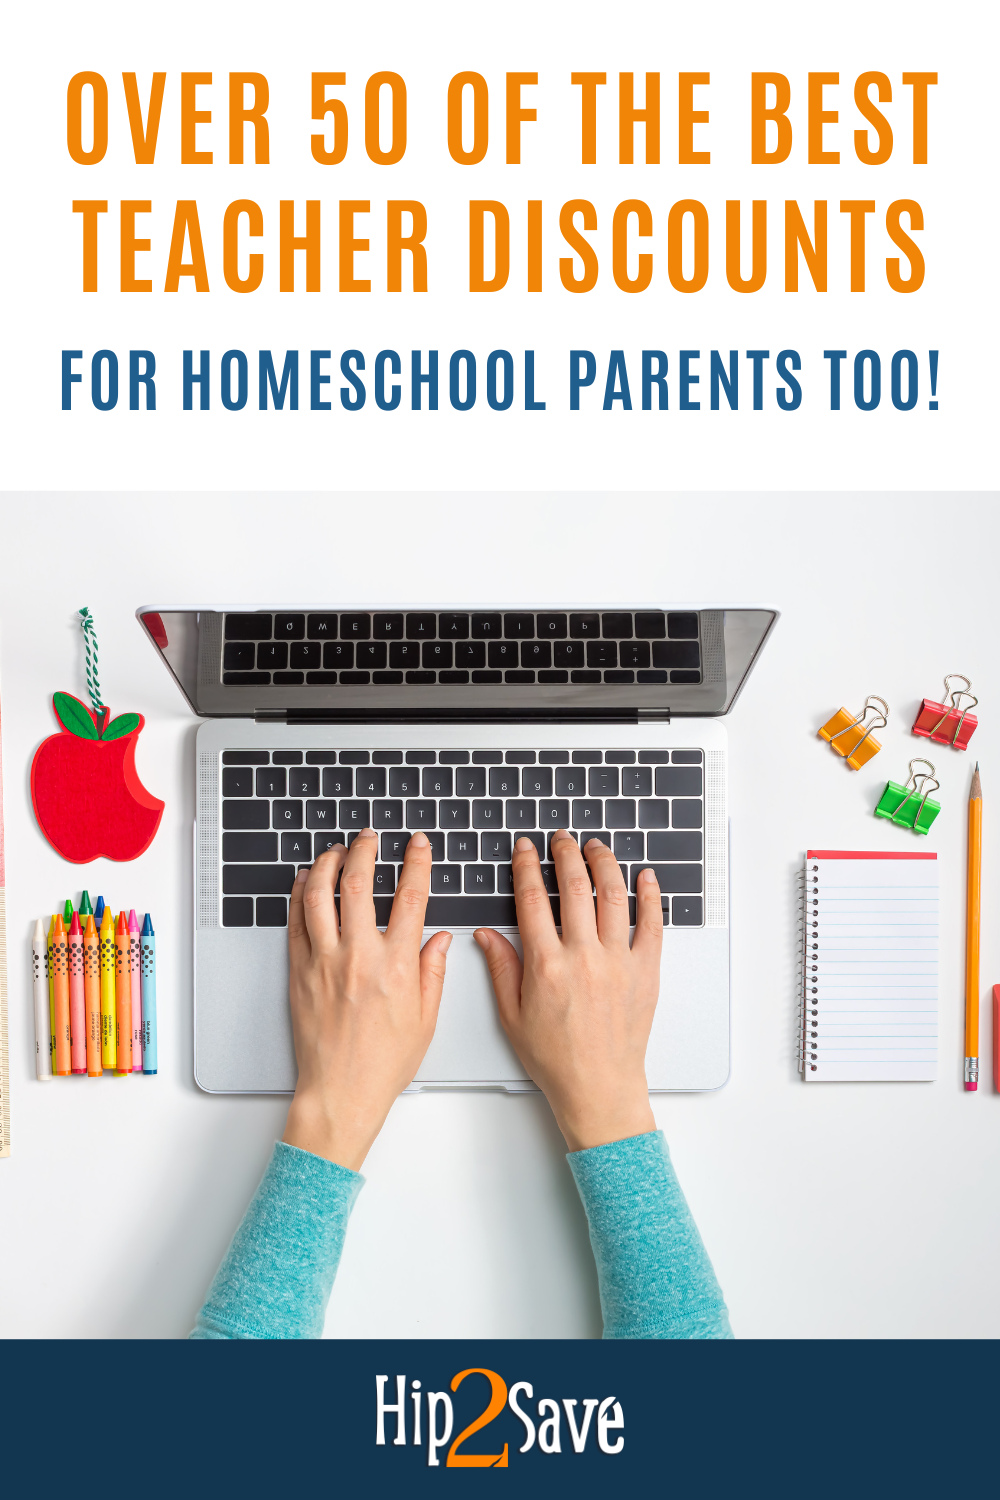 Over 50 Of The Best Teacher Discounts Apple Store, Michaels, & More